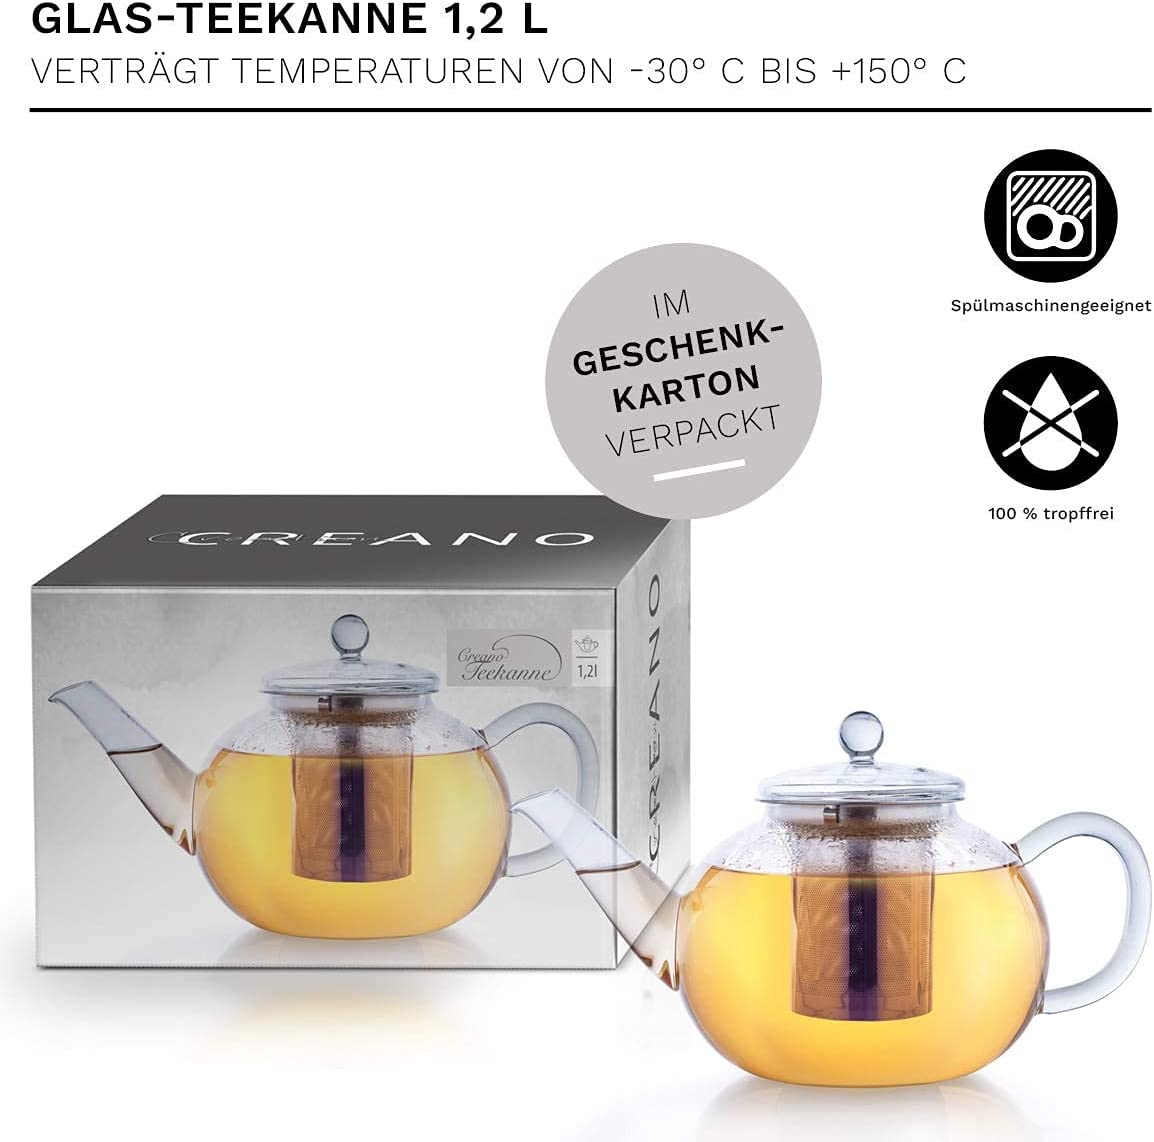 Creano teapot (bulky type) tested in 2022